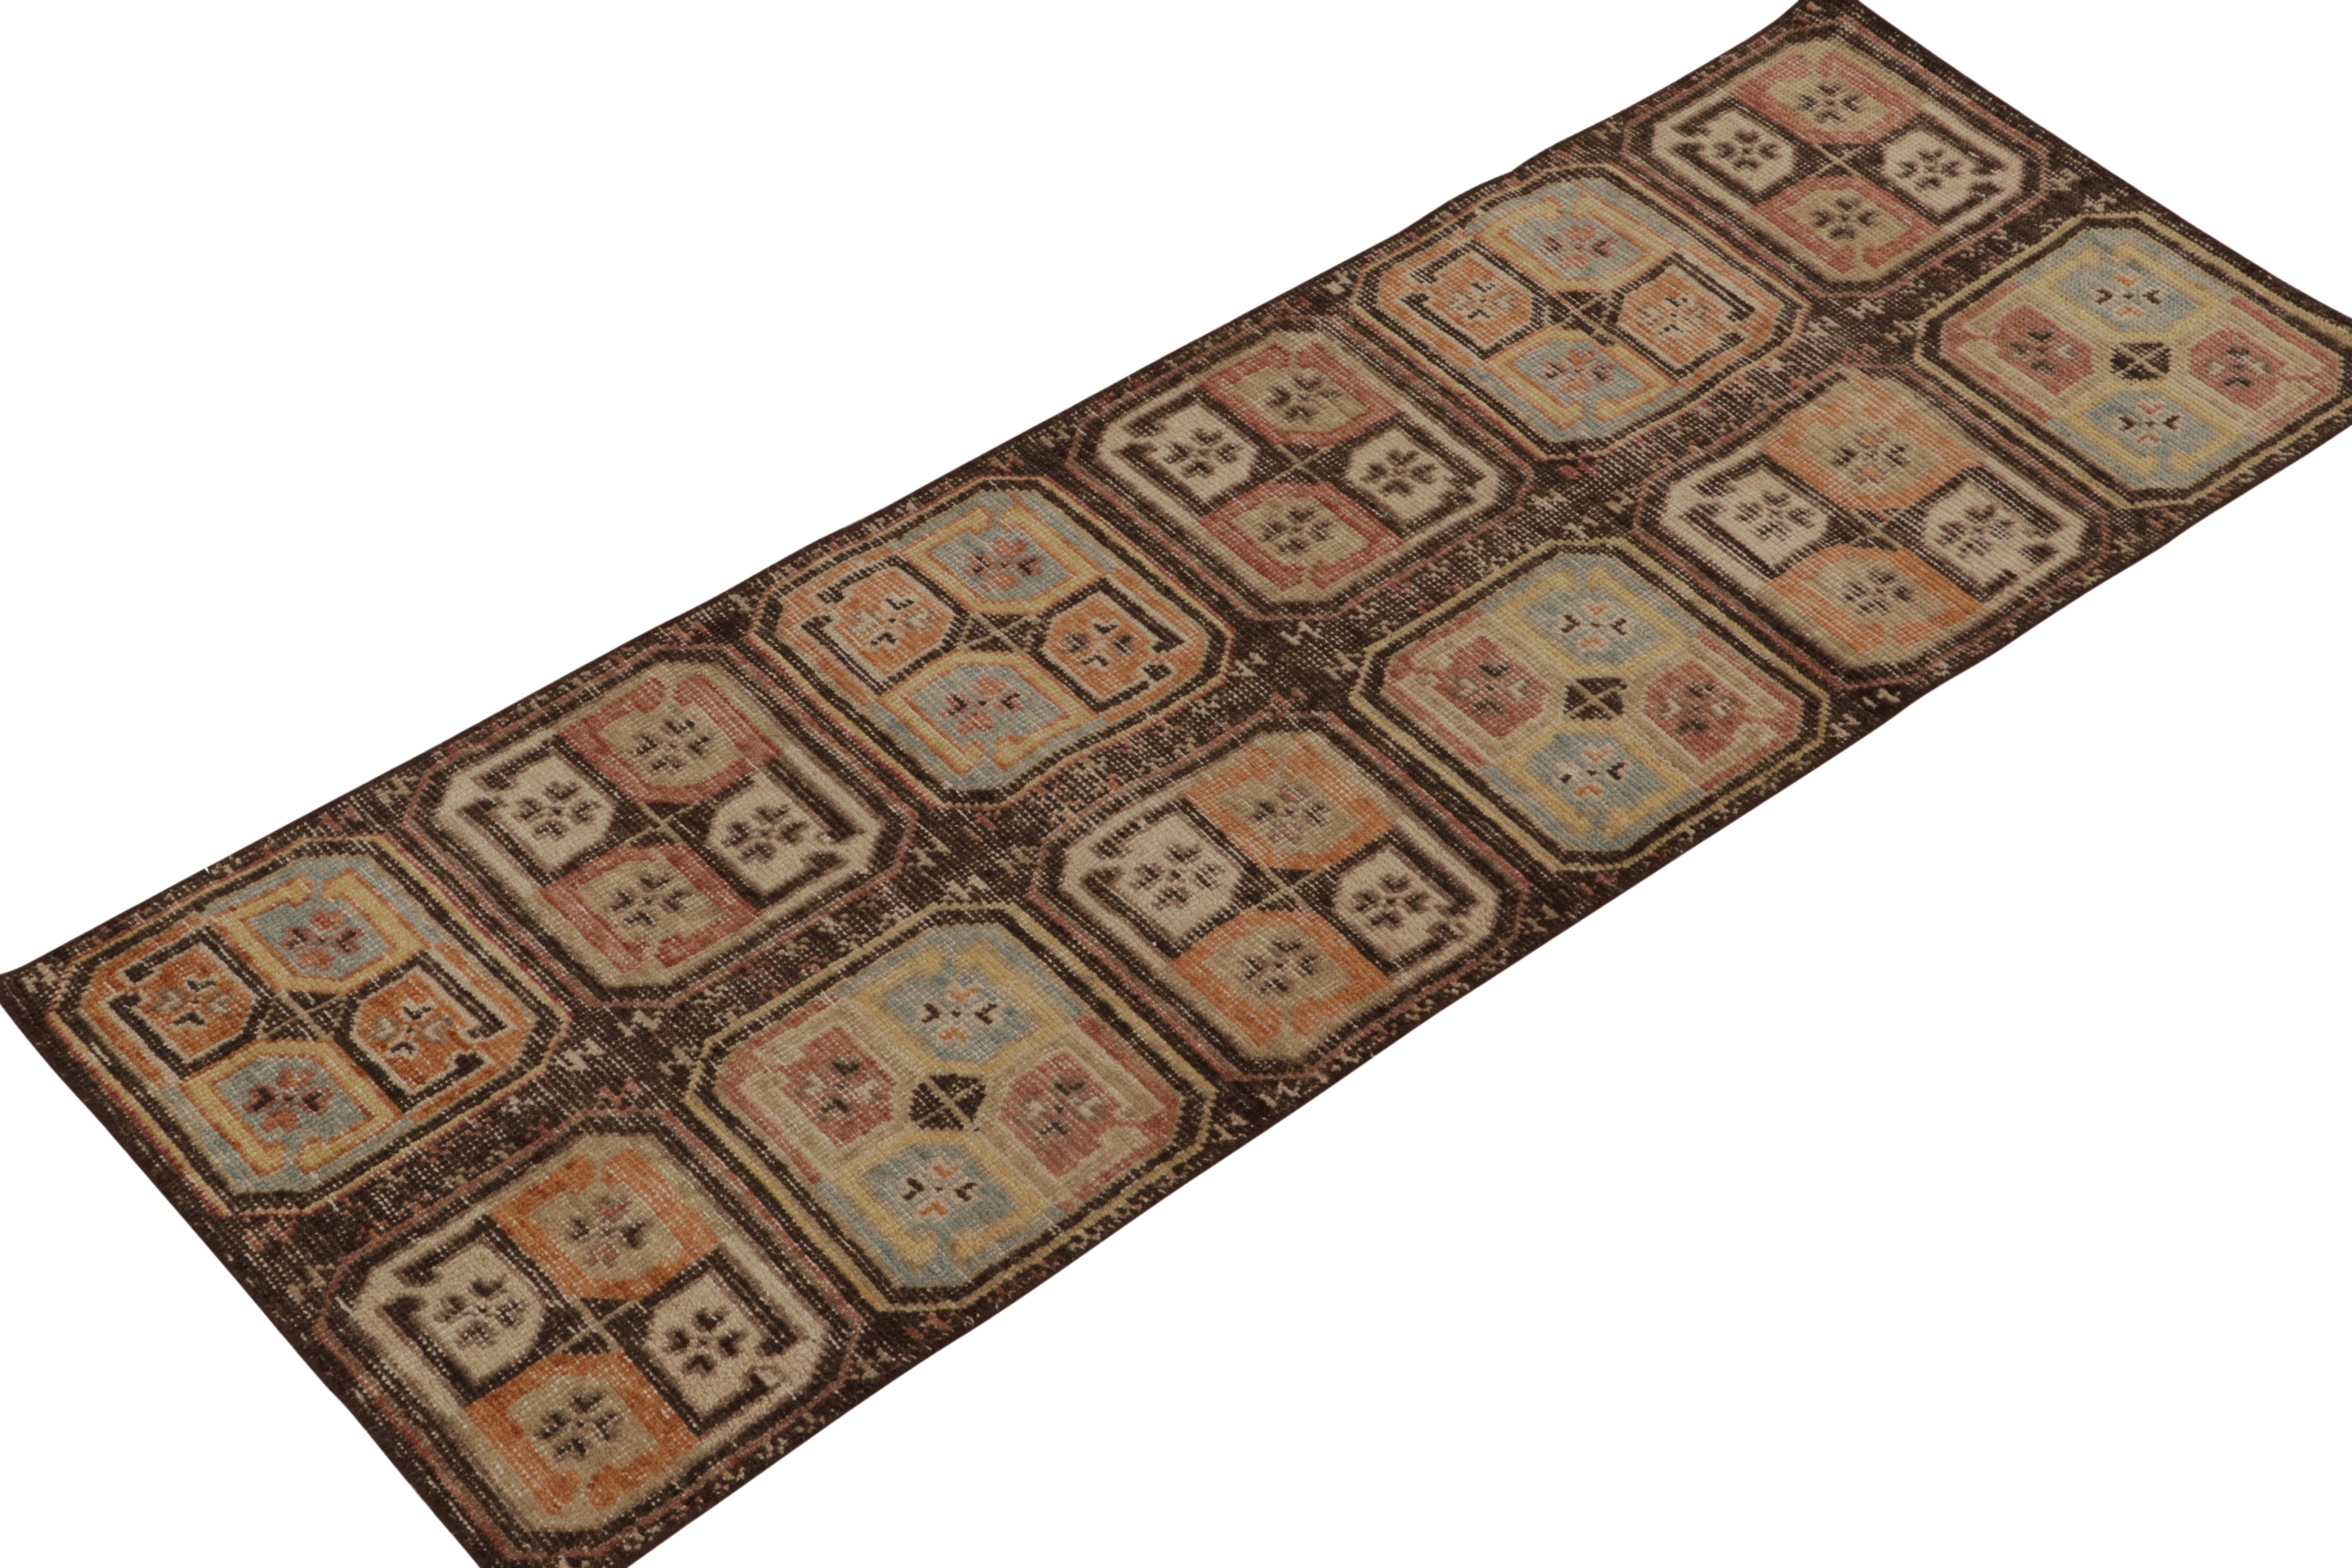 From Rug & Kilim’s Homage Collection, a 3x6 hand-knotted wool runner inspired by antique Turkmen textile designs of the late 19th century. 

On the Design: The sketch is reimagined in our shabby chic aesthetics with rich beige-brown uplifting the